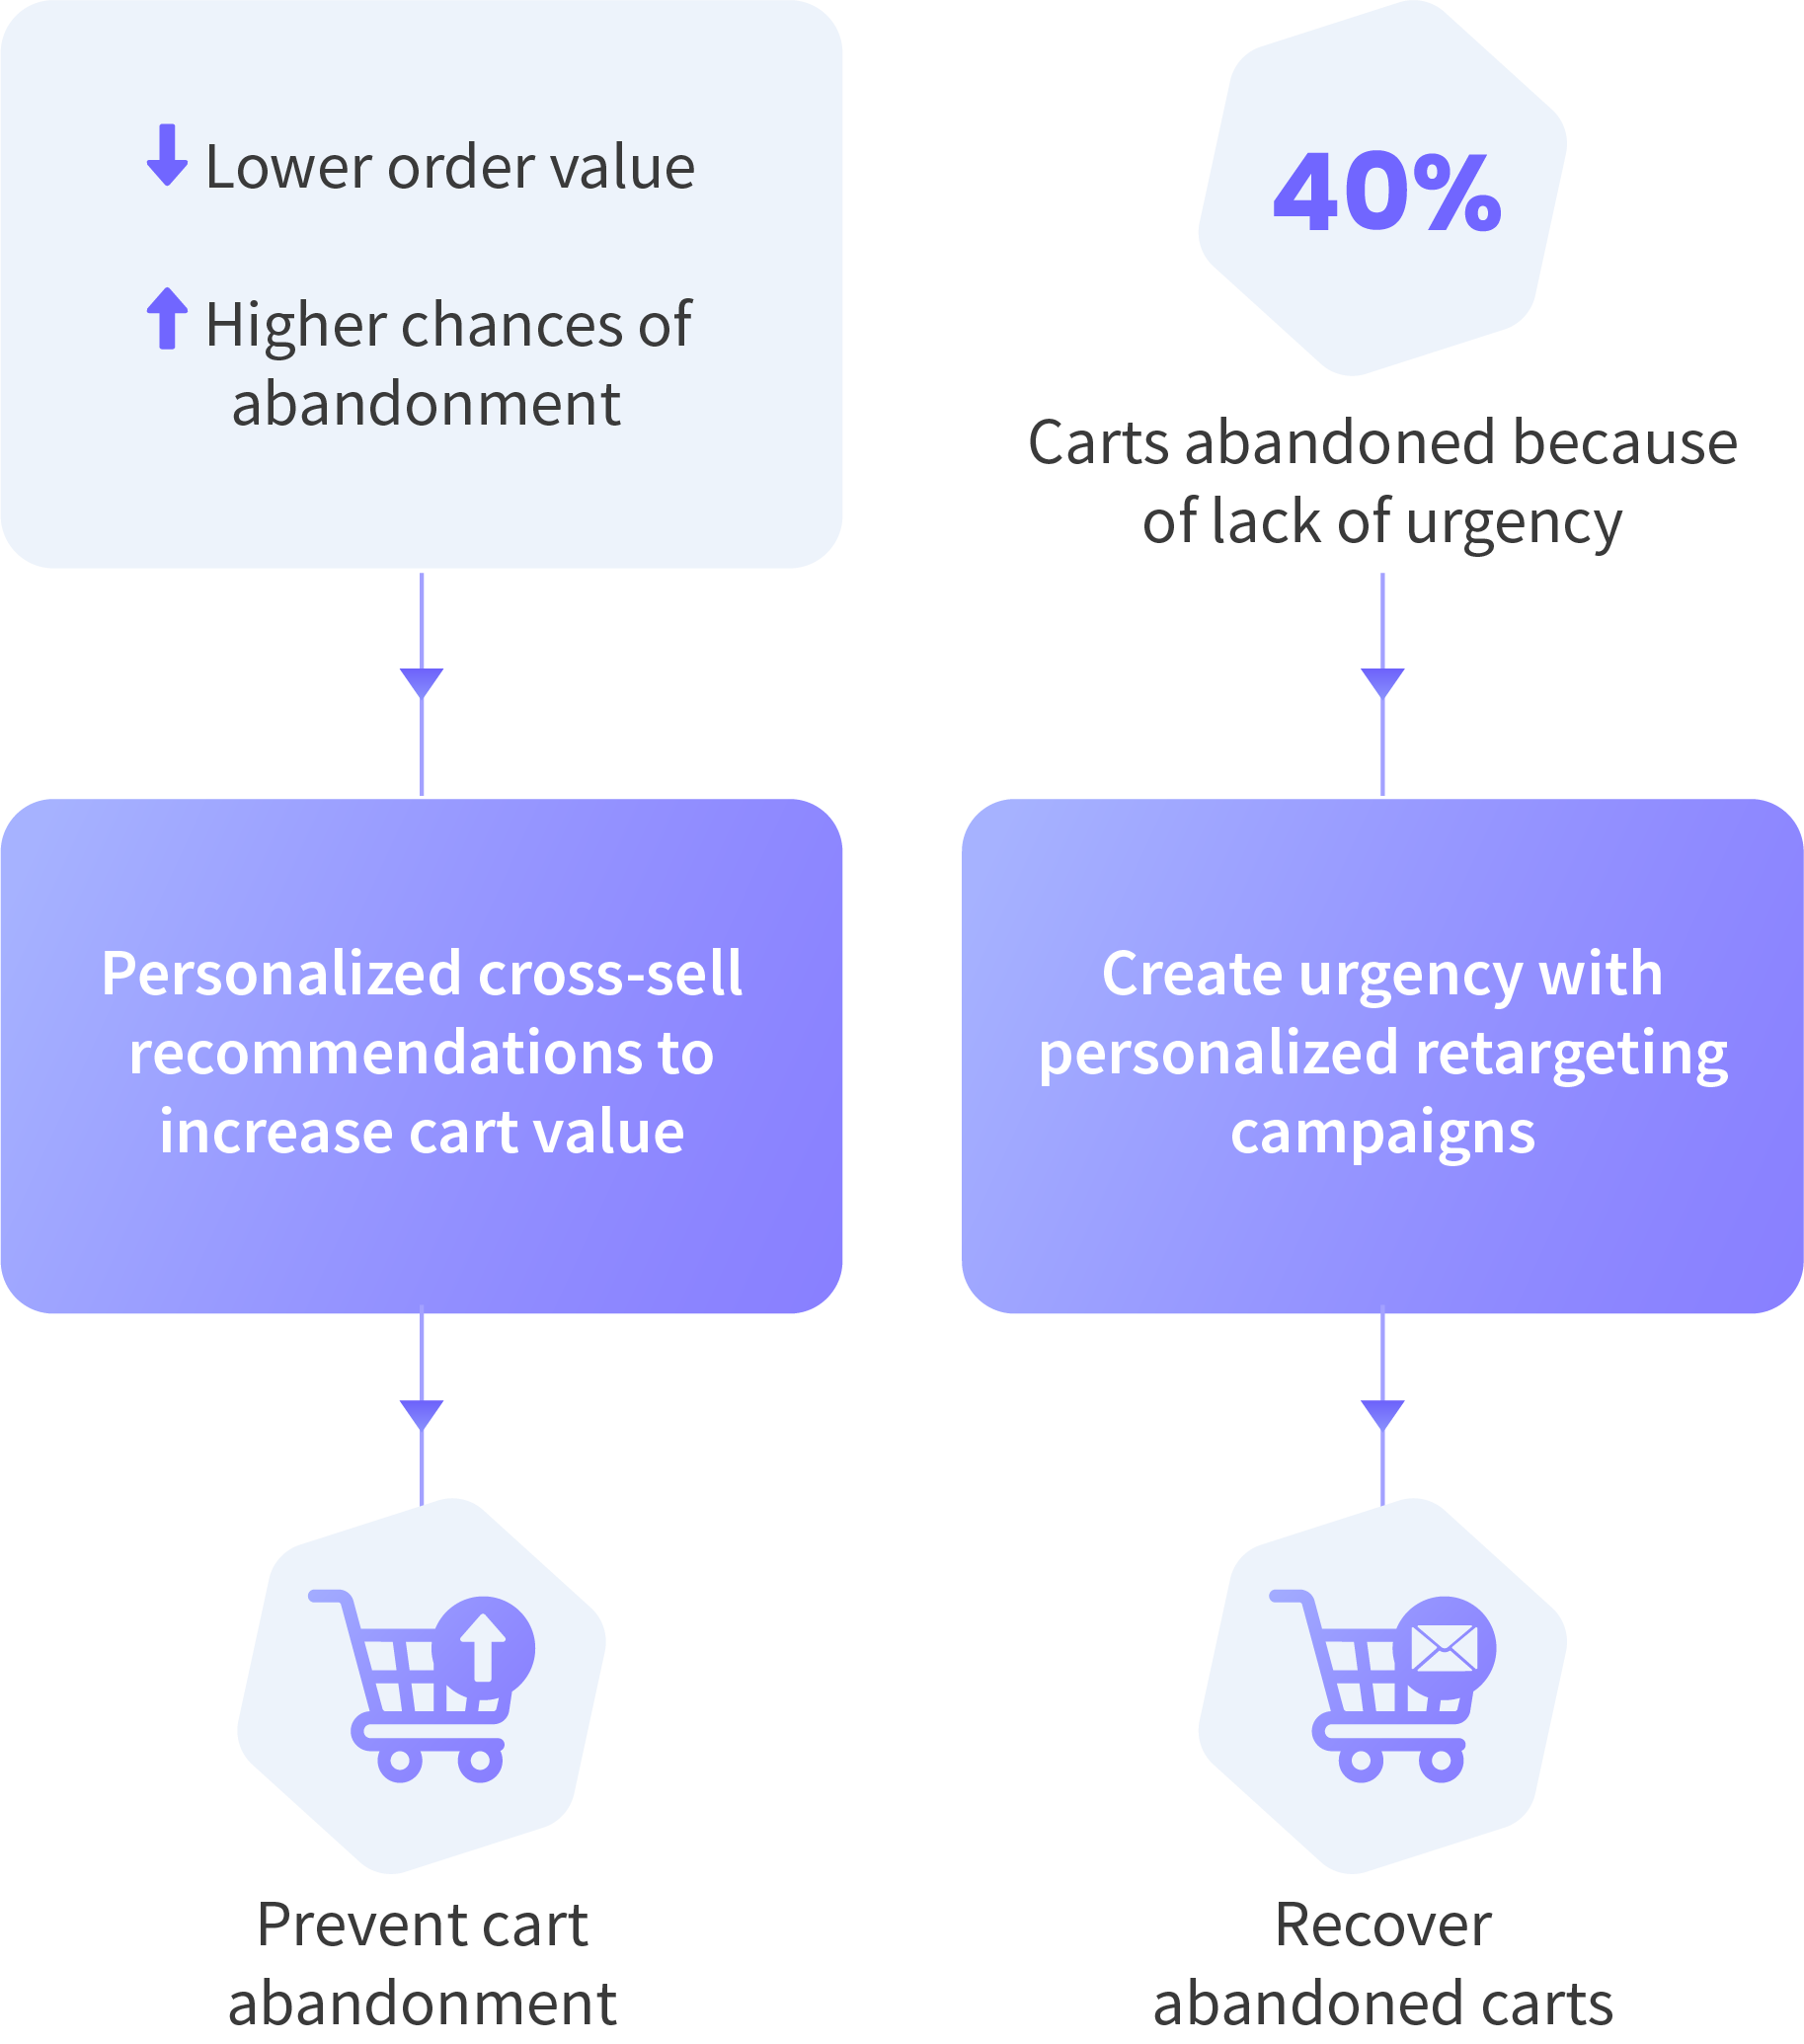 We help eCommerce businesses battle cart abandonment using AI-powered personalization by